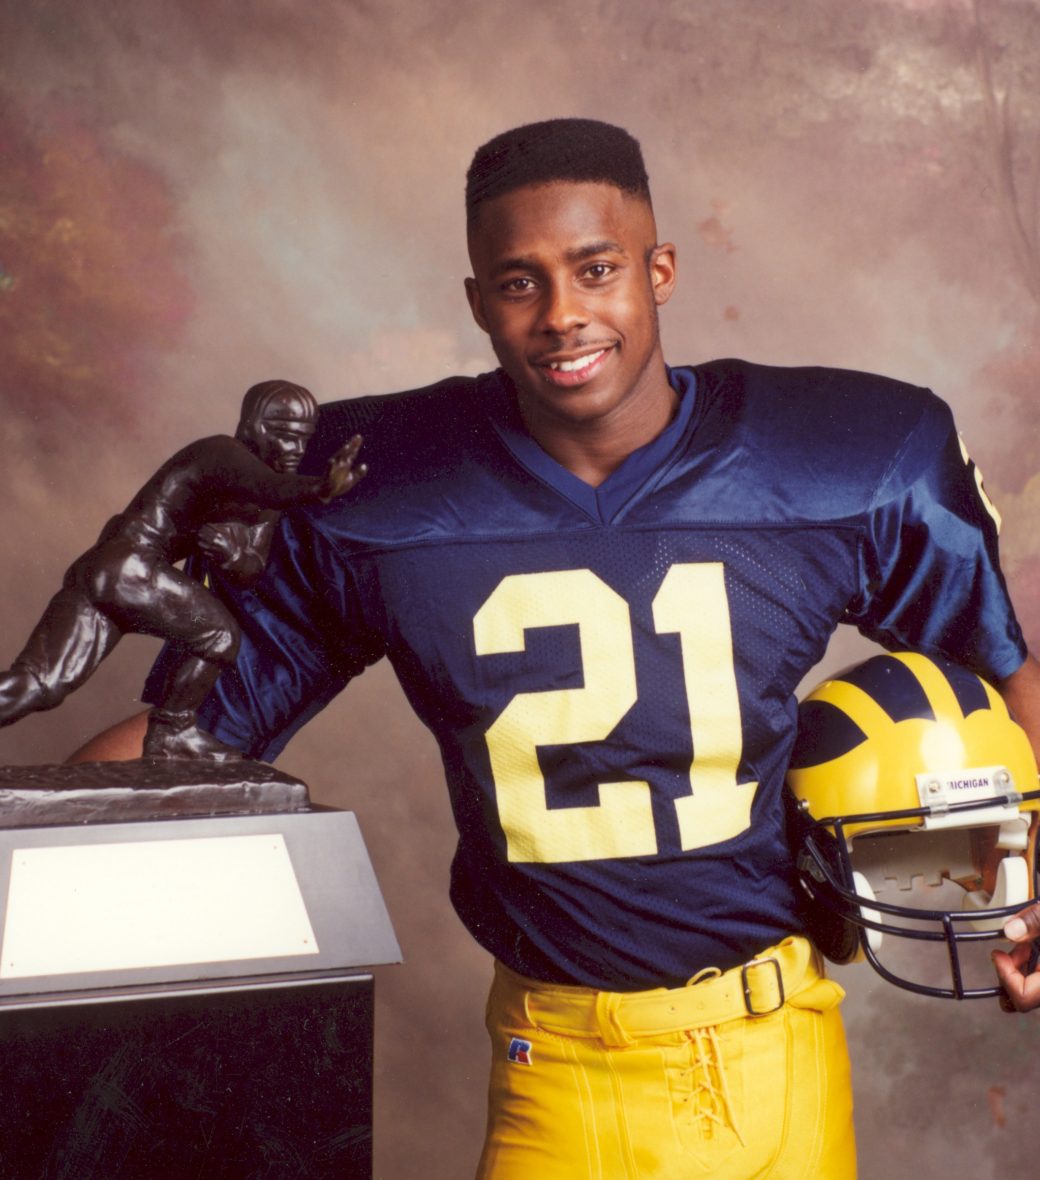 Desmond Howard (1991): This year marks the 25th anniversary of Desmond Howard winning the award. As a wide receiver at Michigan, Howard helped lead the team to a 10-1 regular season and led the conference in scoring. (Courtesy of University of Michigan Athletics)